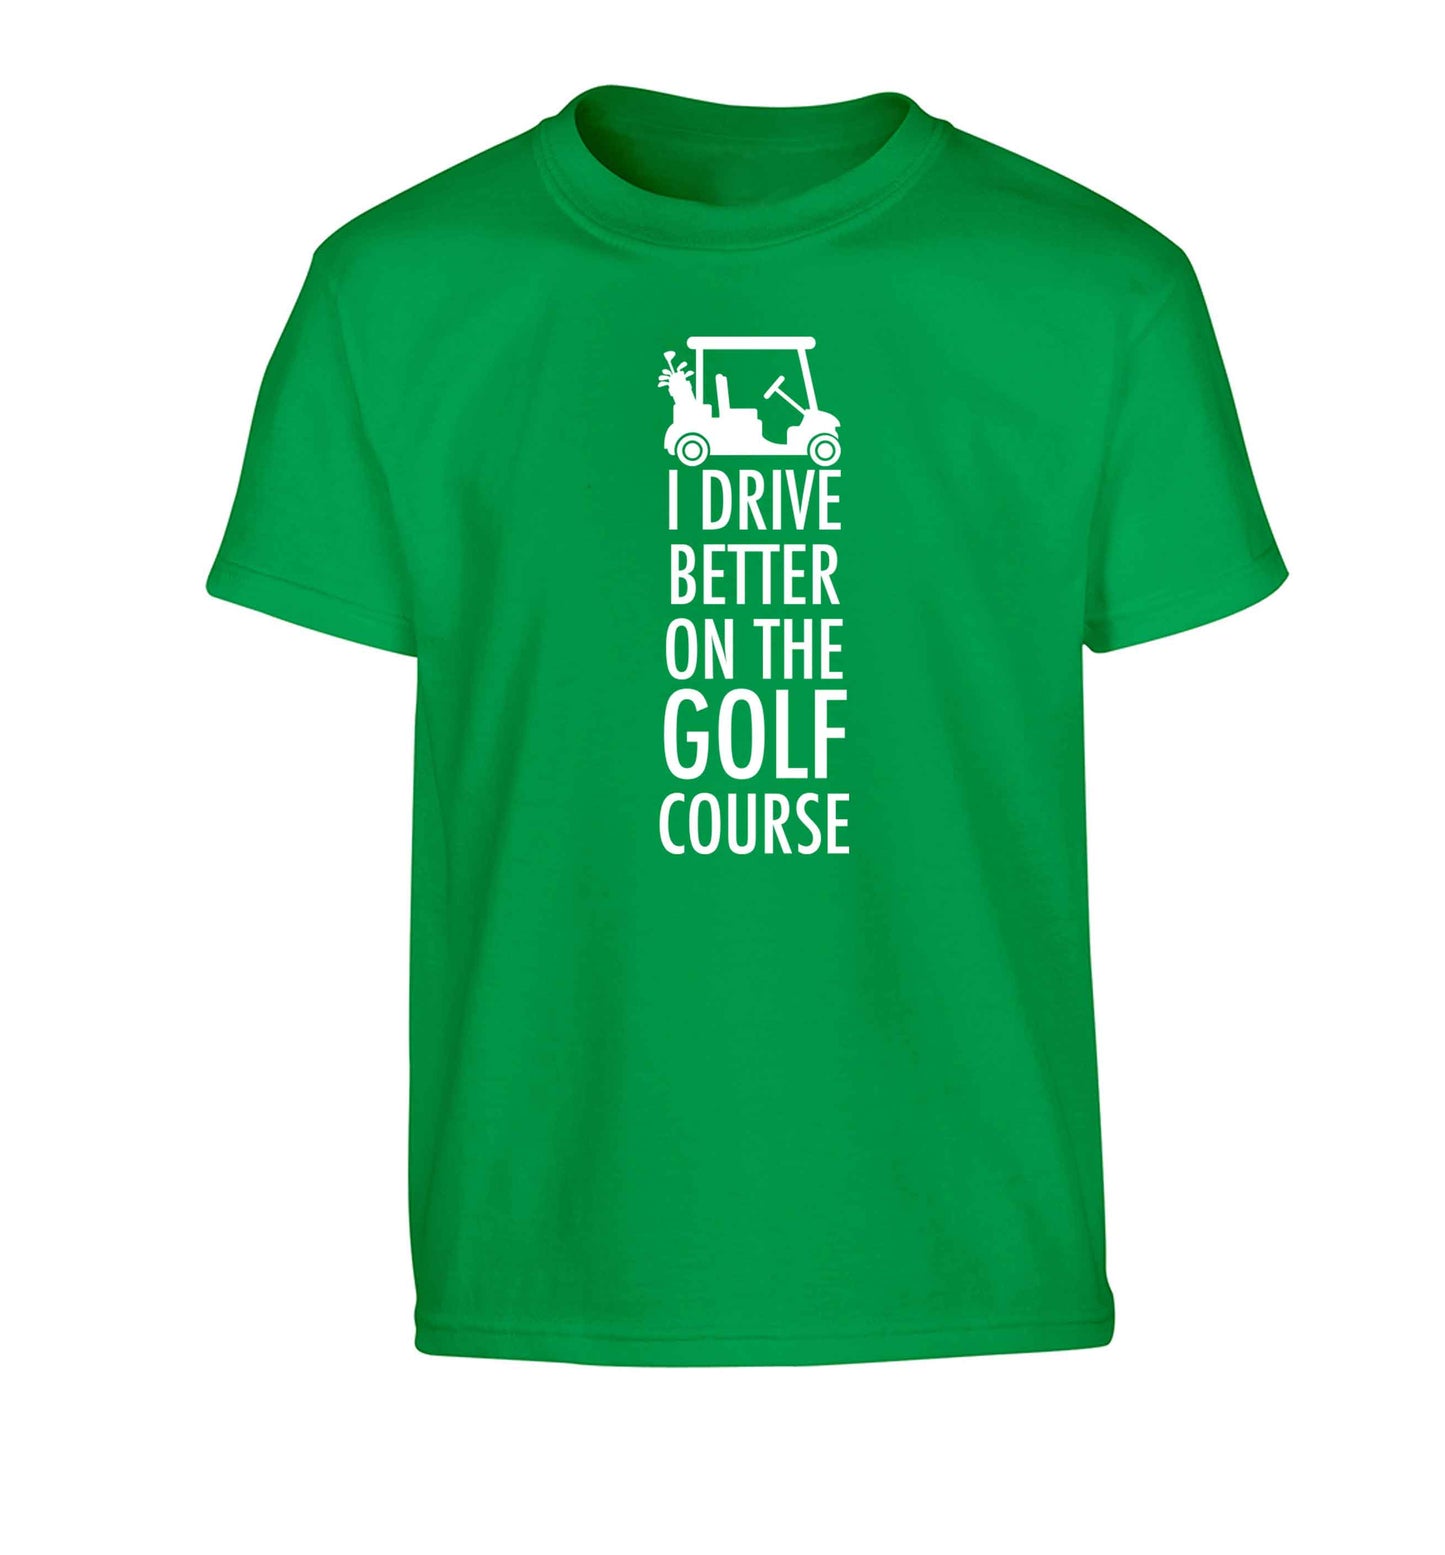 I drive better on the golf course Children's green Tshirt 12-13 Years